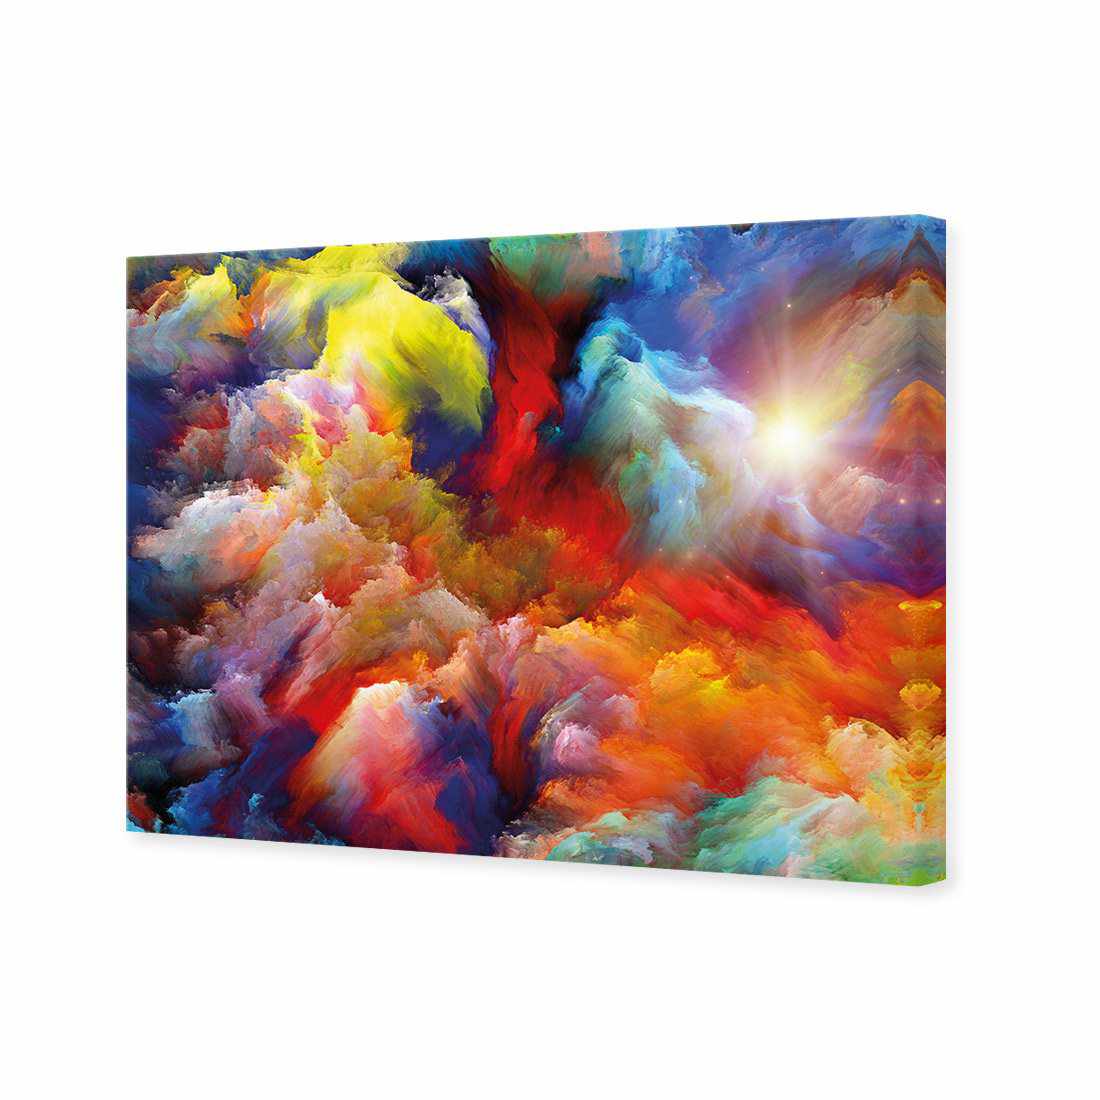 Clouds Of Colour Canvas Art-Canvas-Wall Art Designs-45x30cm-Canvas - No Frame-Wall Art Designs